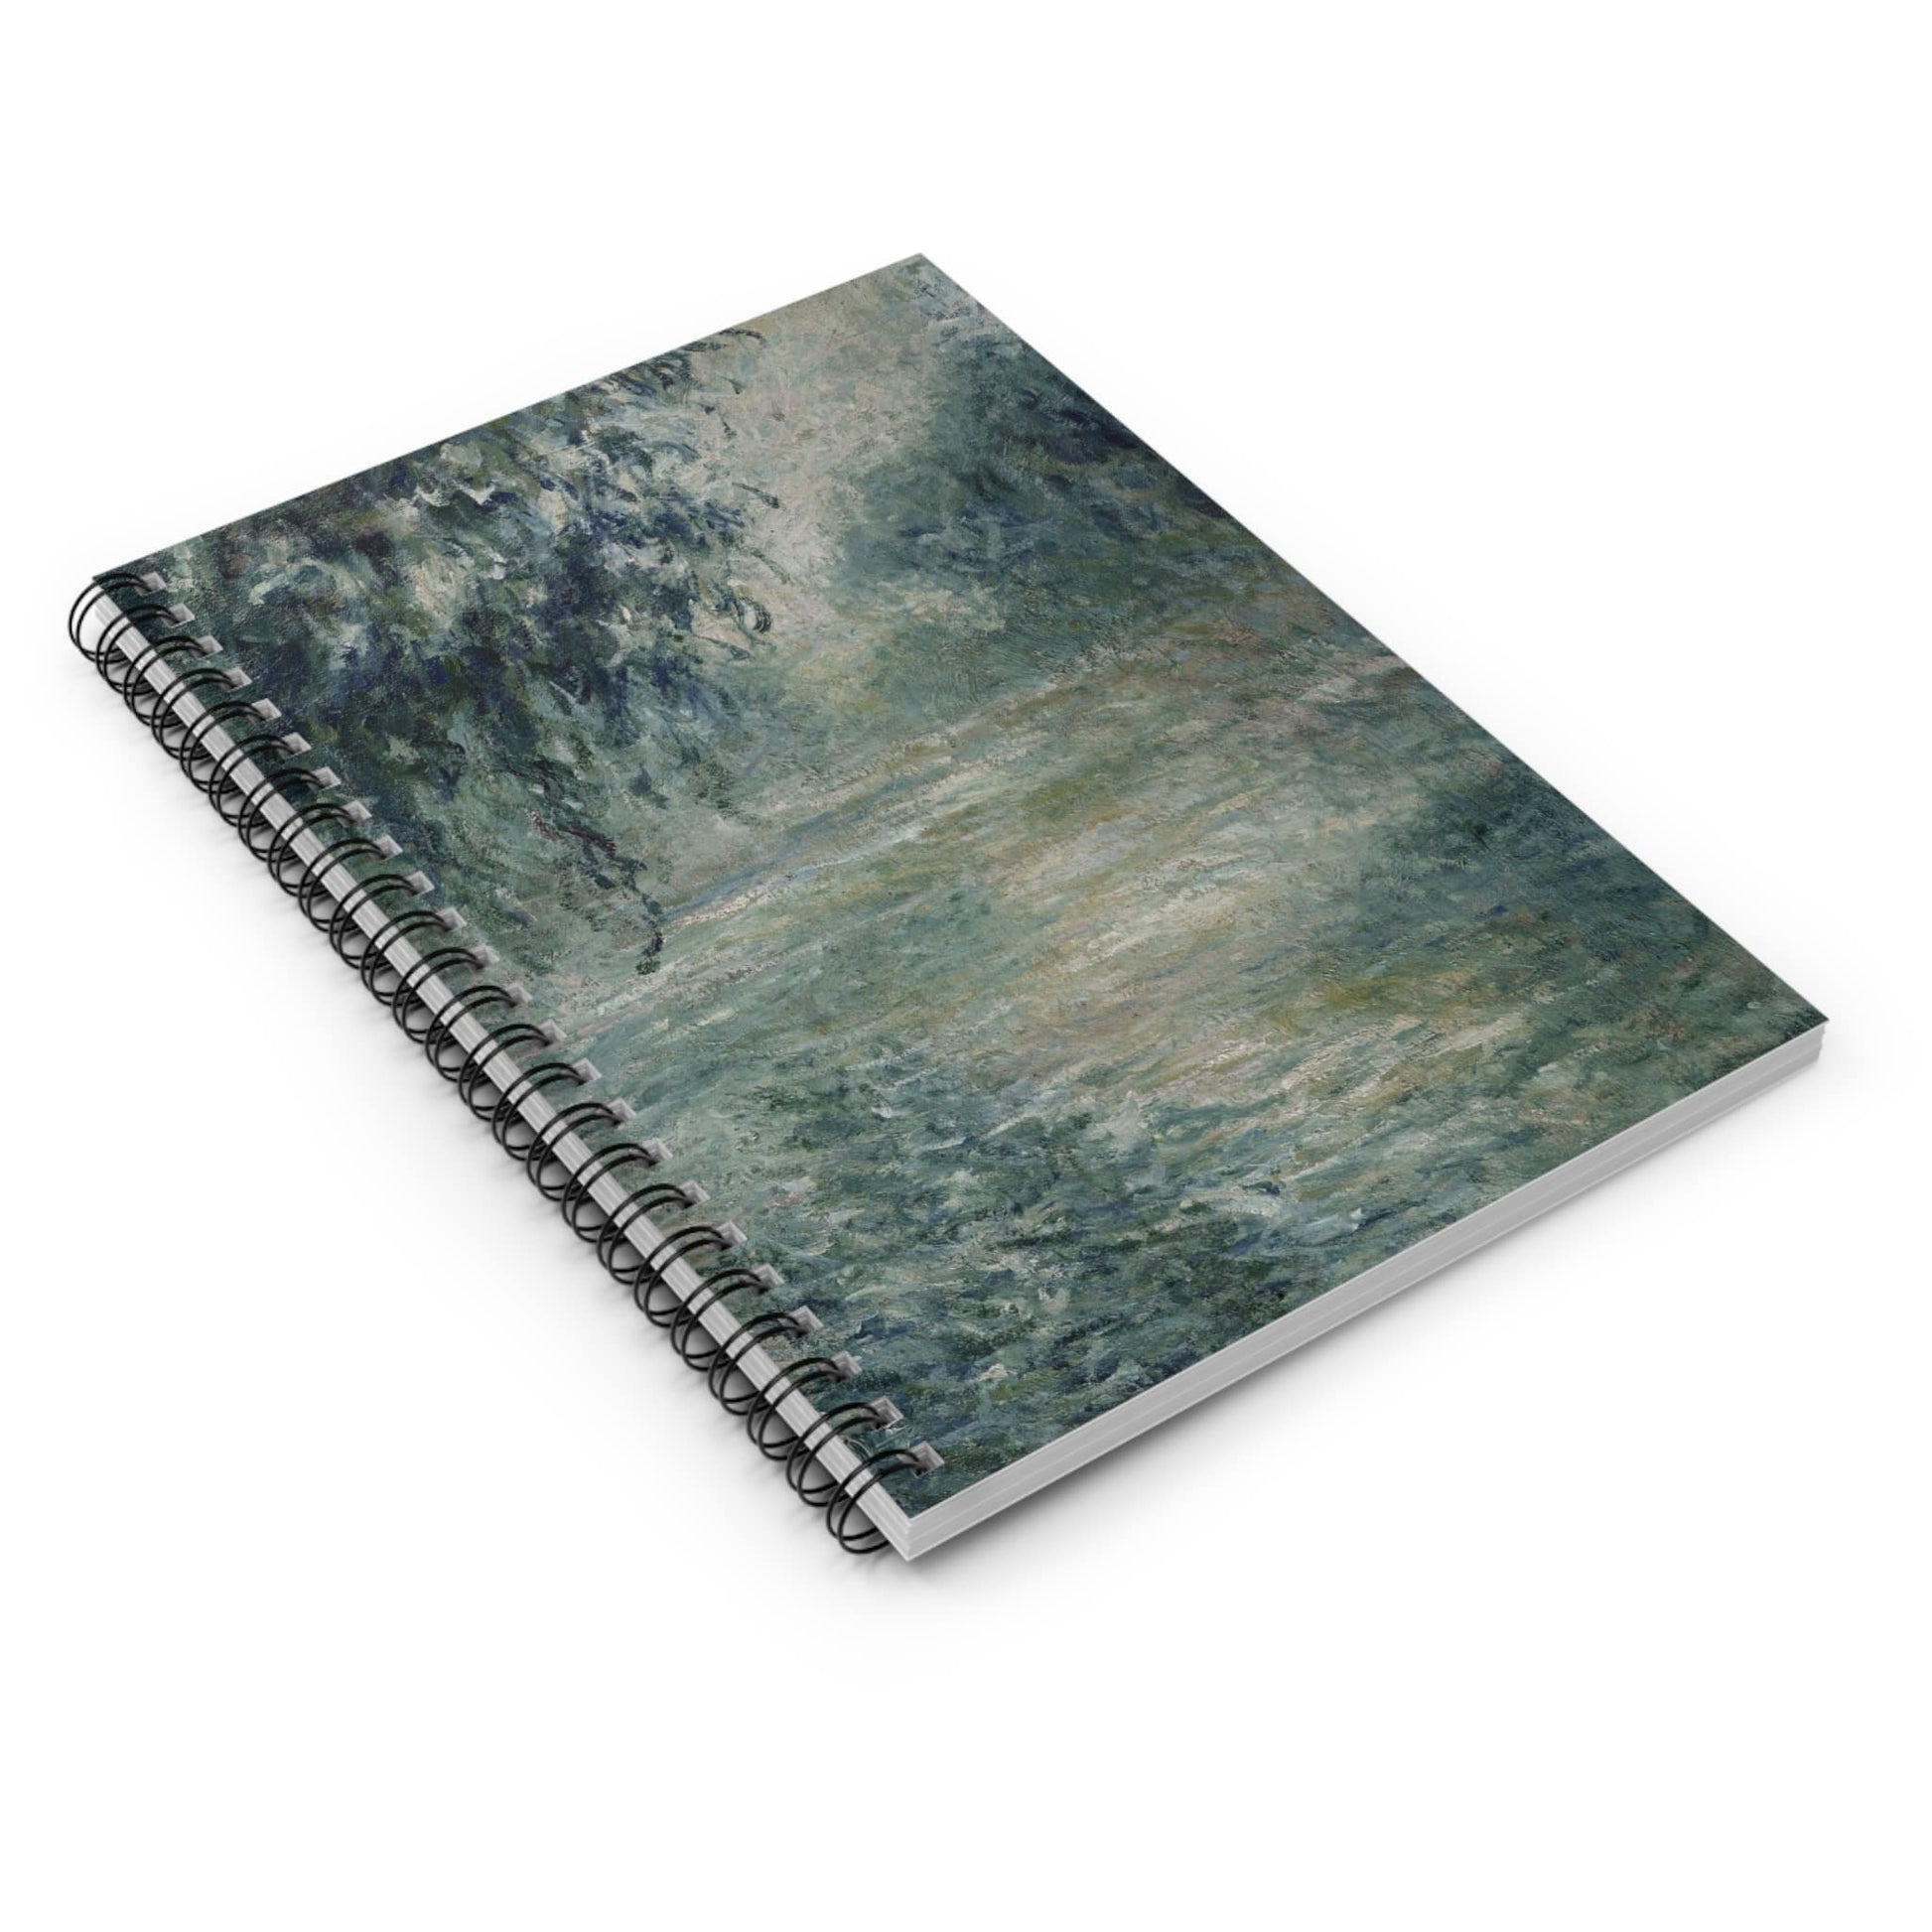 Peaceful Green Spiral Notebook Laying Flat on White Surface